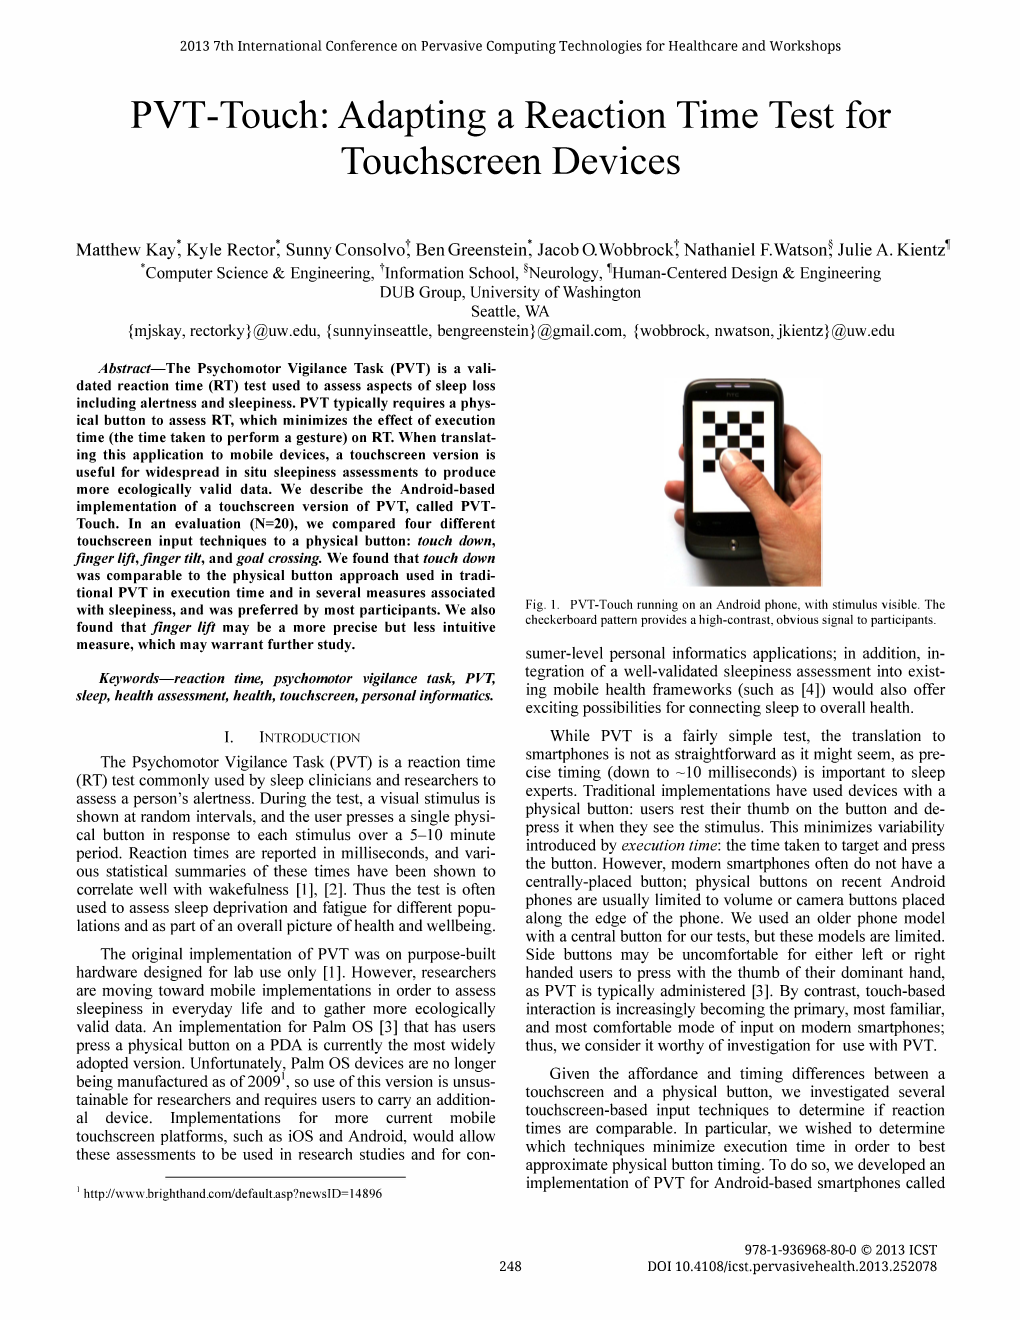 PVT -Touch: Adapting a Reaction Time Test for Touchscreen Devices